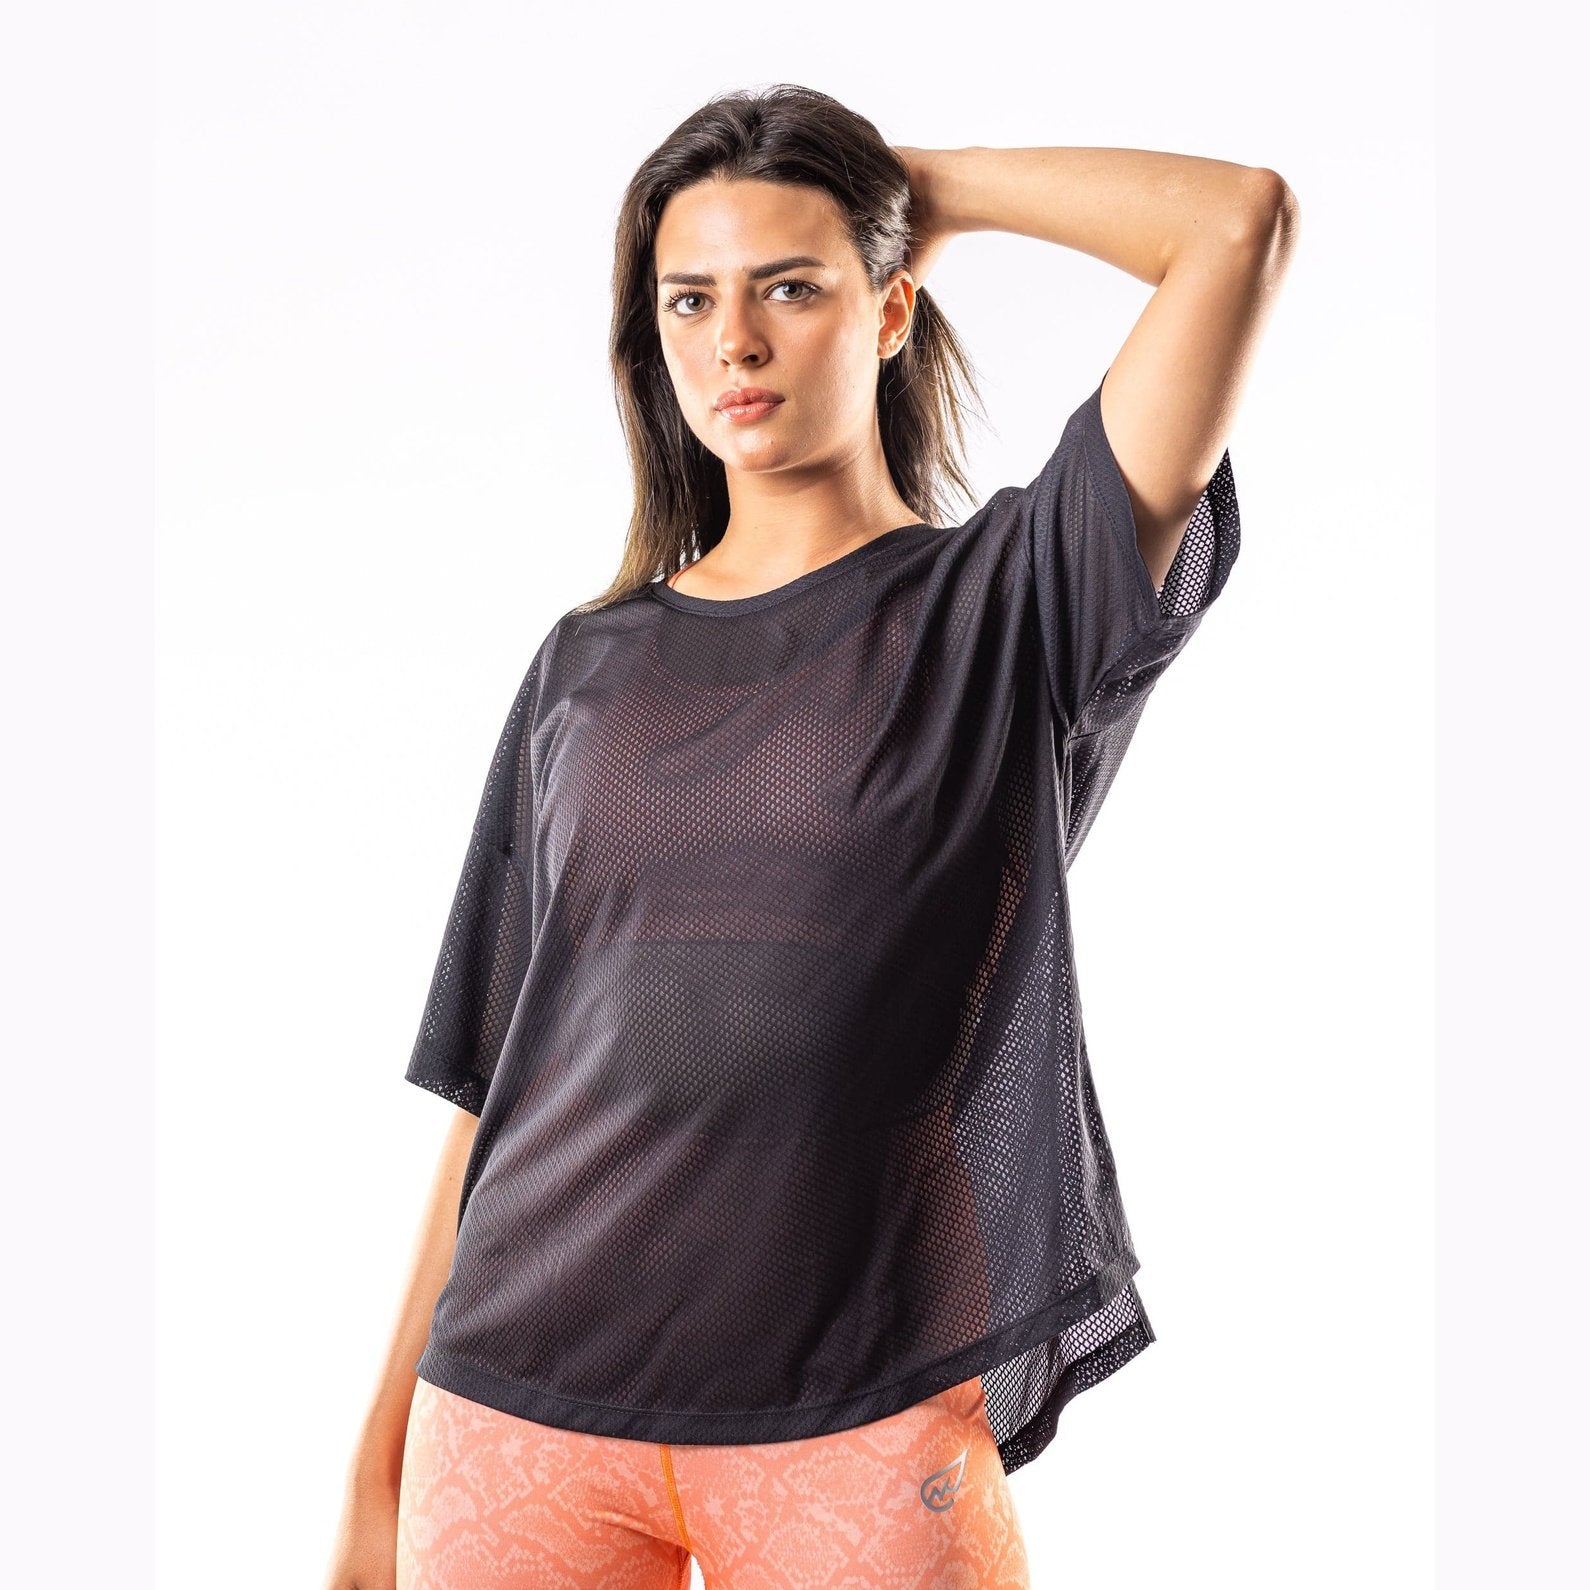 Breathable Mesh T-Shirt in Black - Sporty Pro